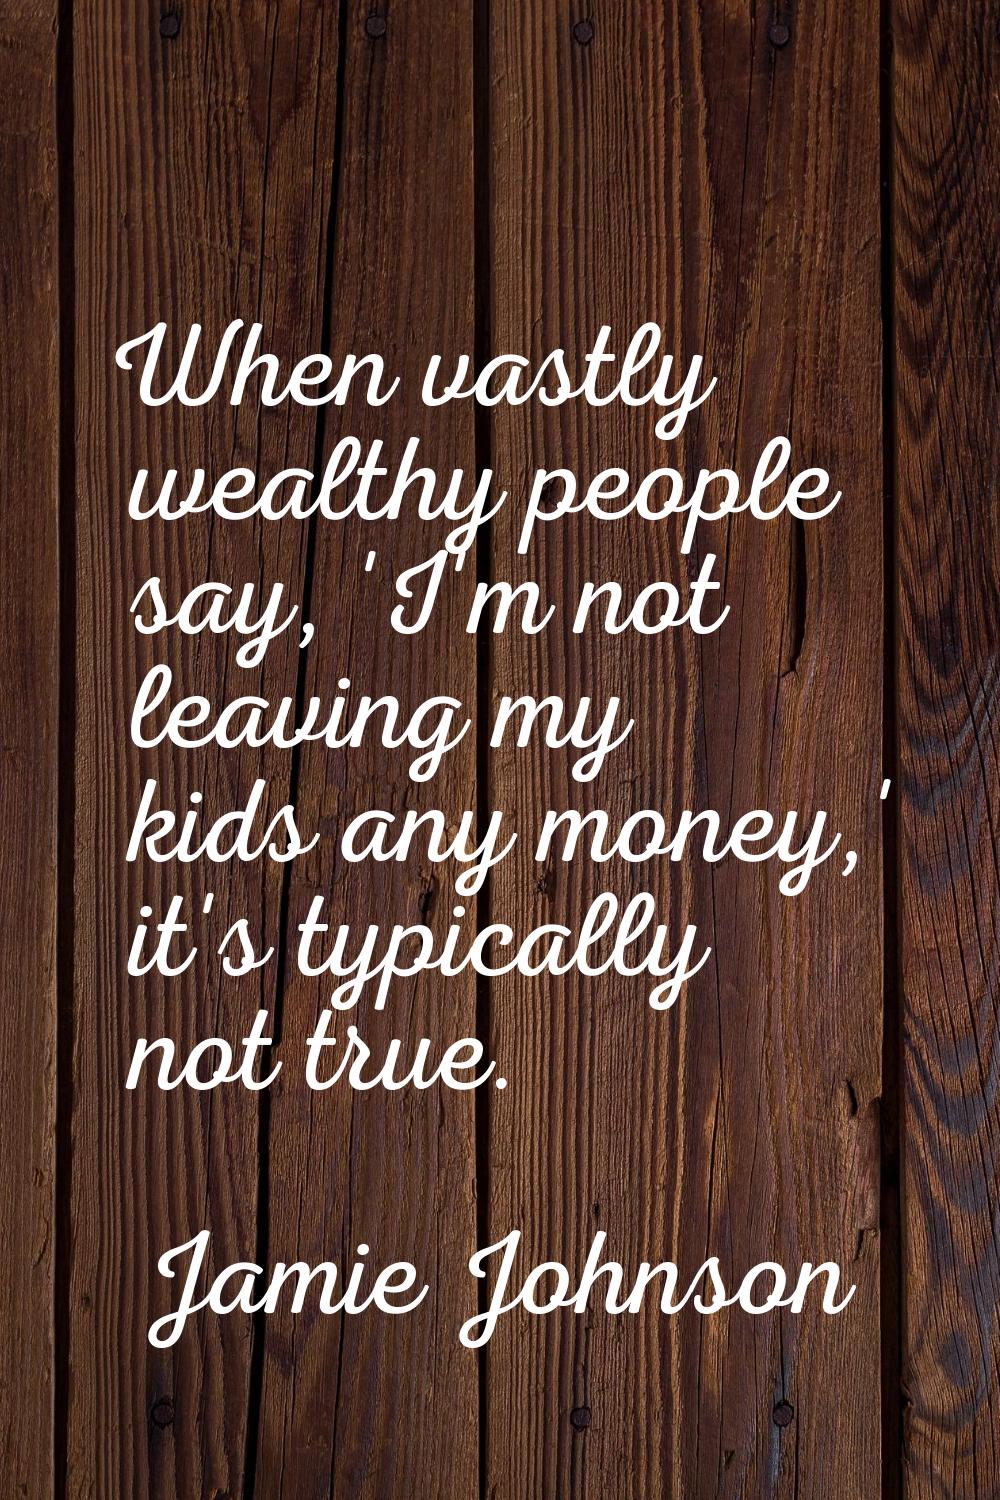 When vastly wealthy people say, 'I'm not leaving my kids any money,' it's typically not true.